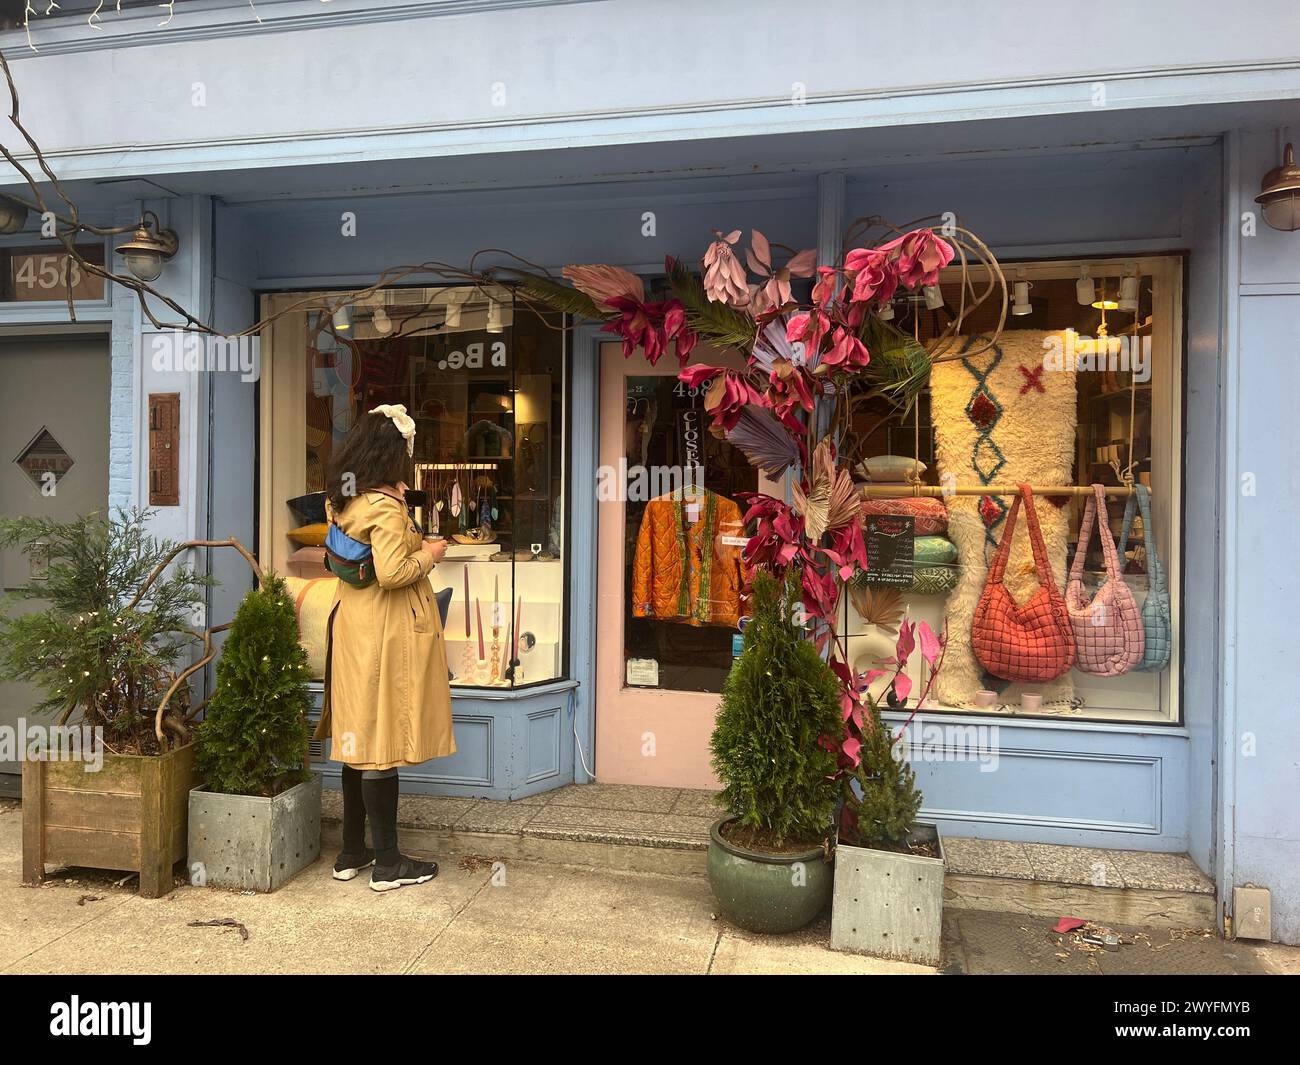 Woman looks into the window of a women's clothing and gift shop in Brooklyn, New York. Stock Photo